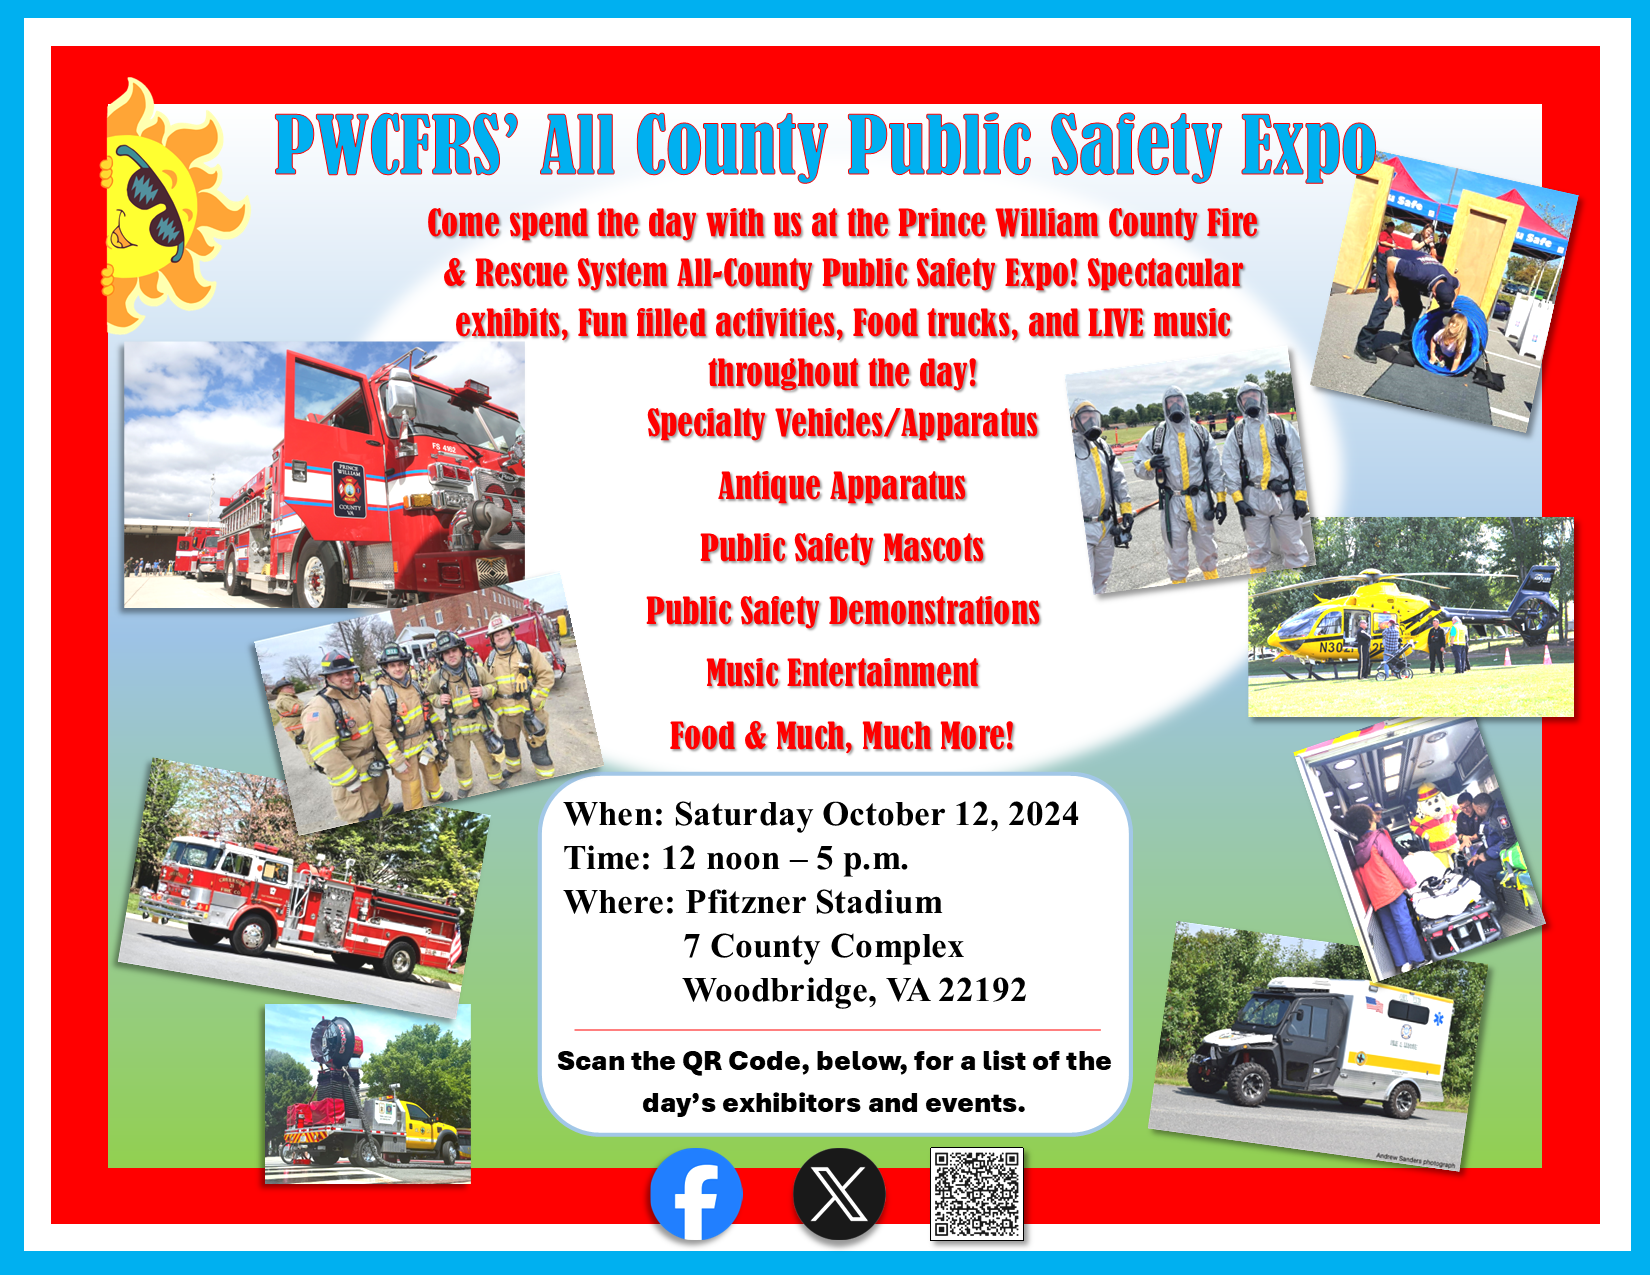 PWCFRS All-County Public Safety Expo